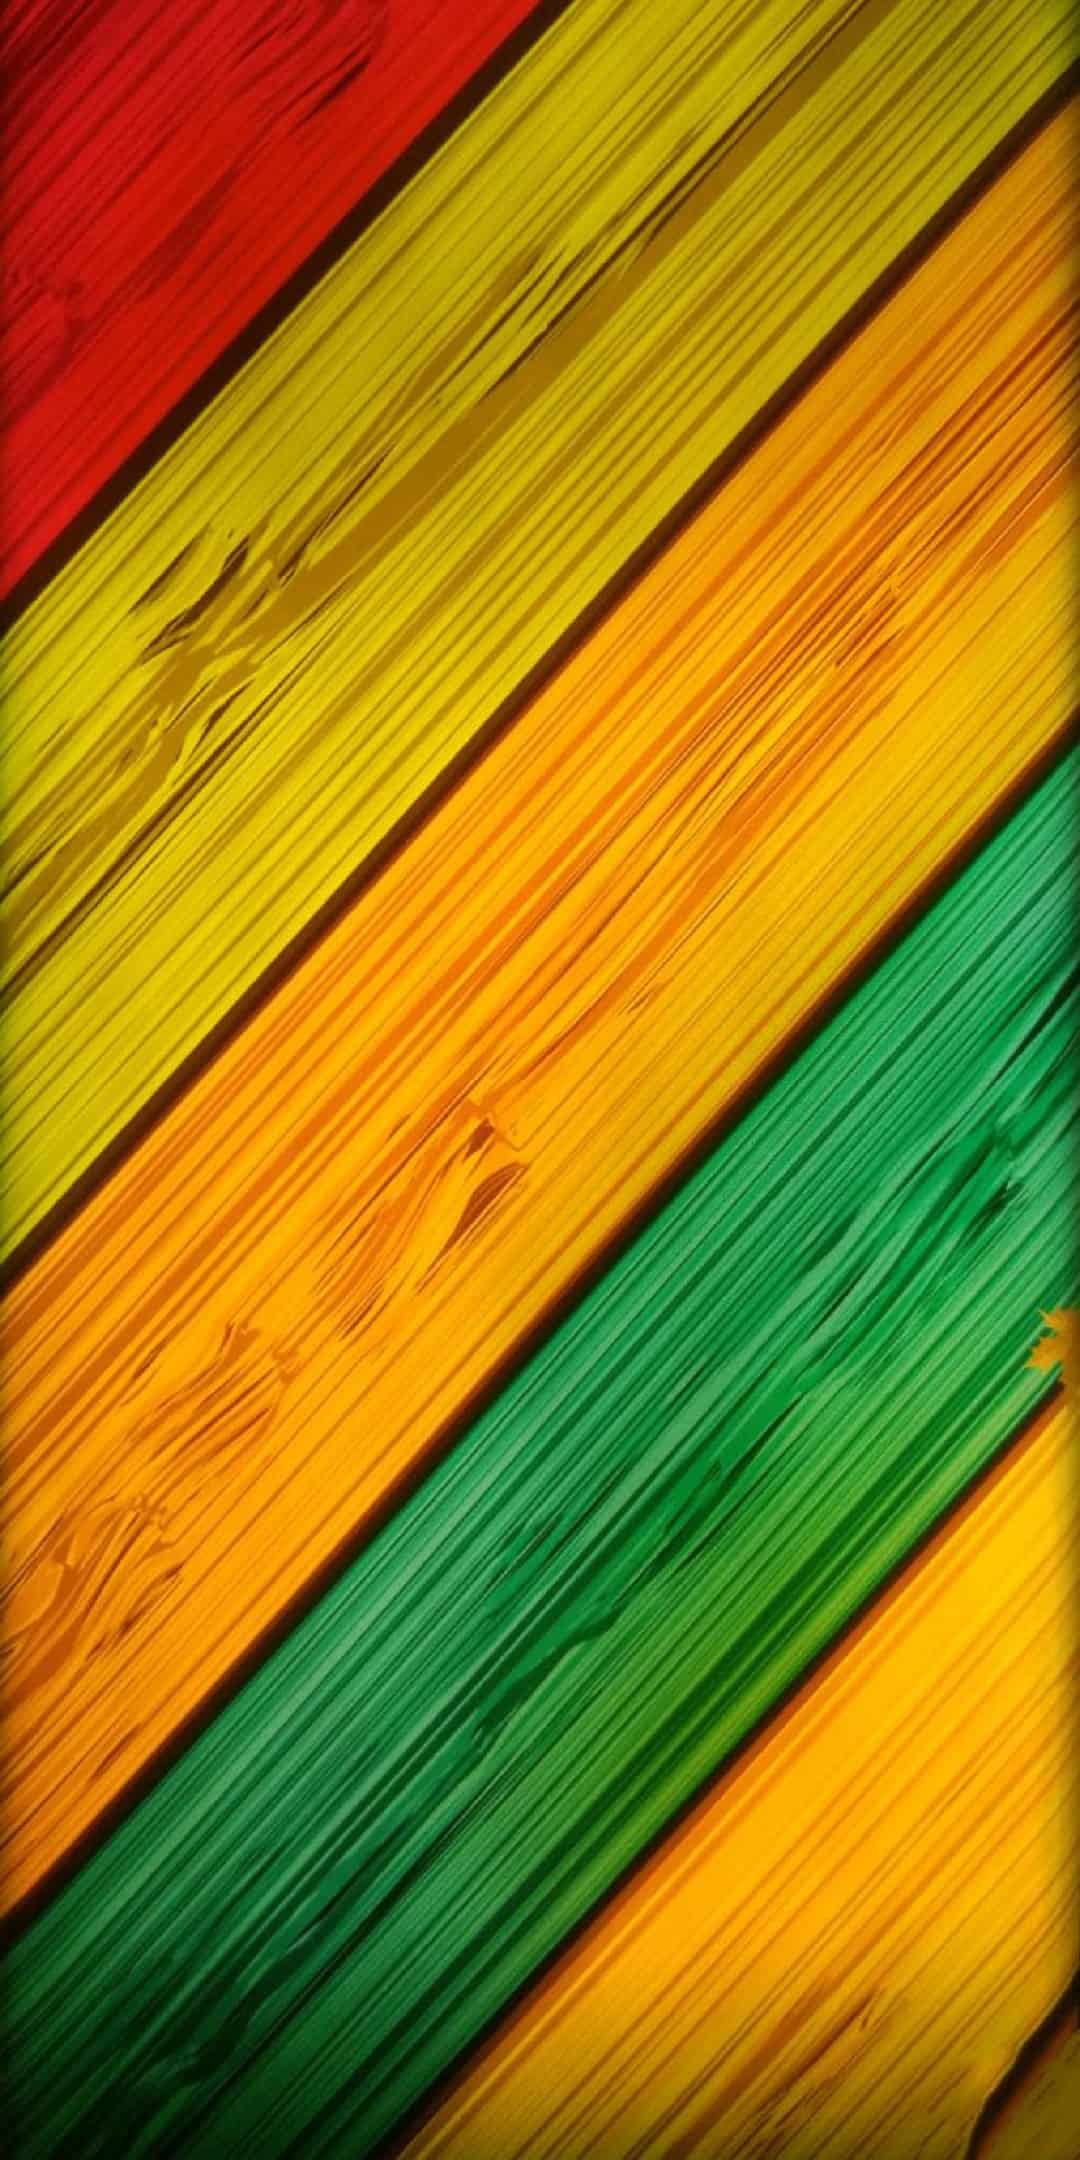 samsung j2 wallpaper full hd,green,yellow,product,wood,wood stain